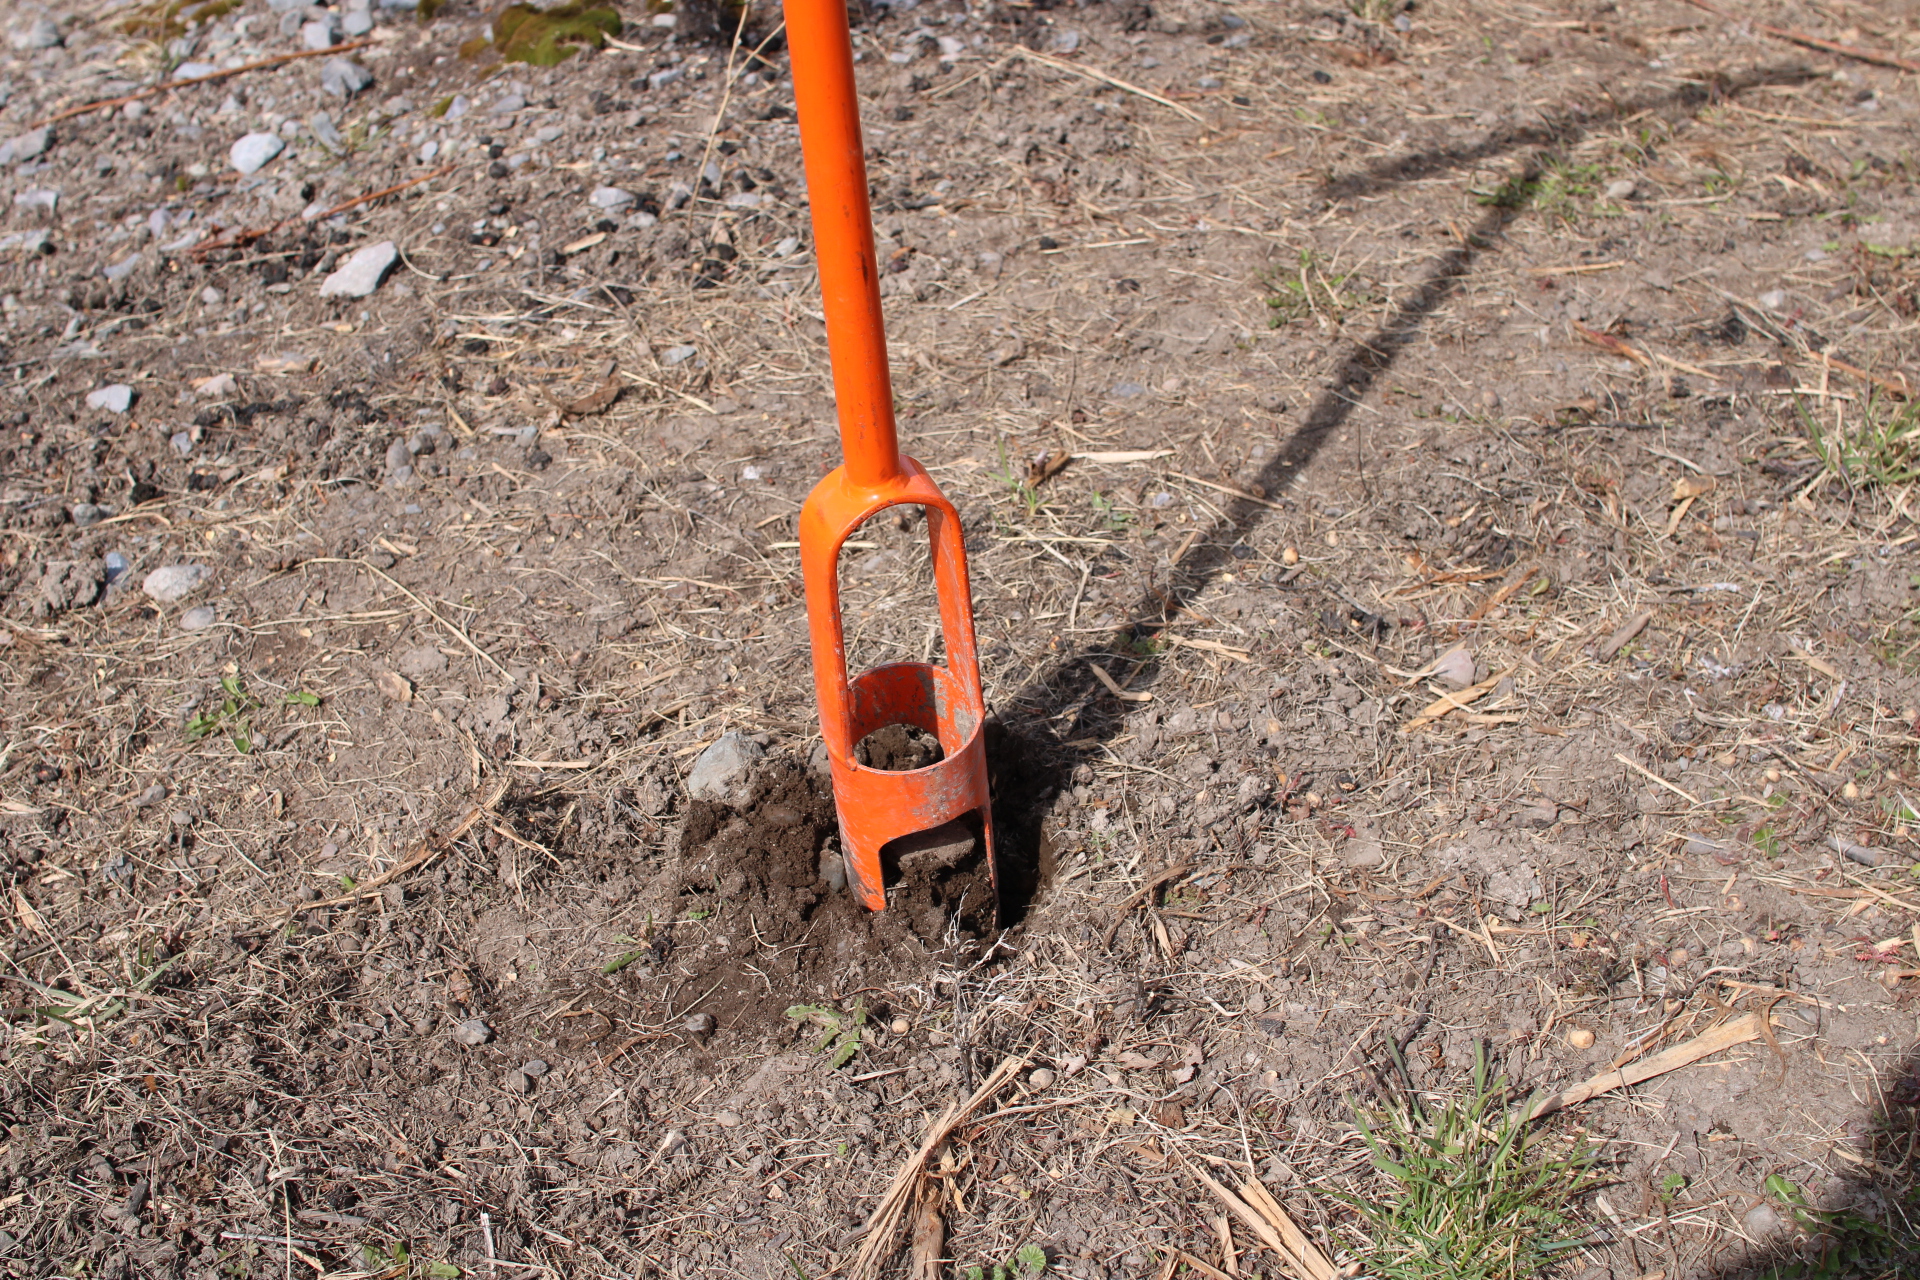 How-to take a soil sample in your Orchard